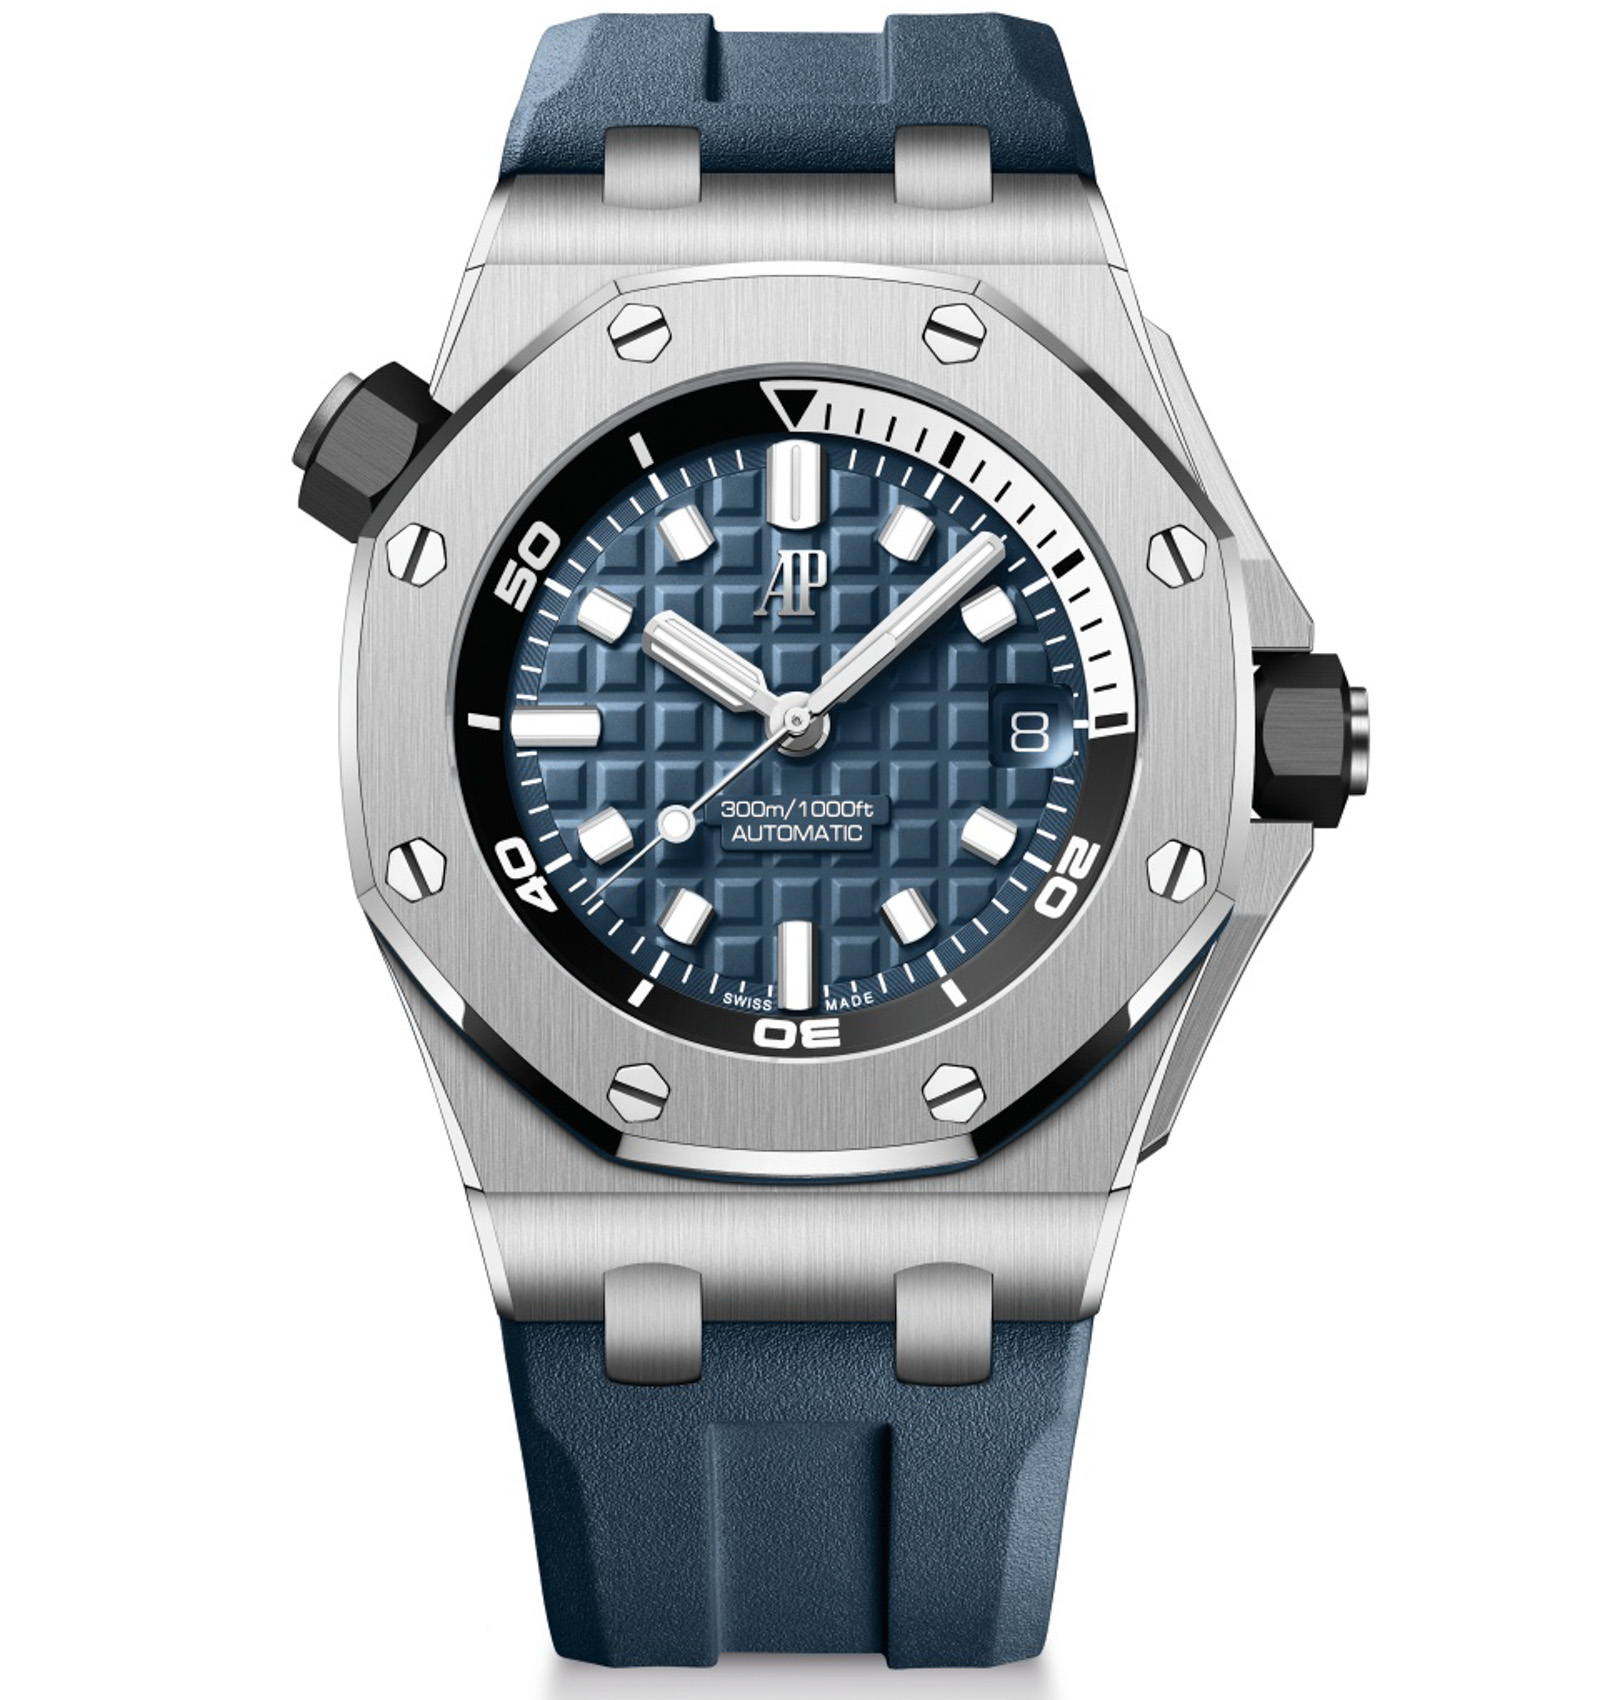 Introducing The New Royal Oak Offshore 42mm Collection From